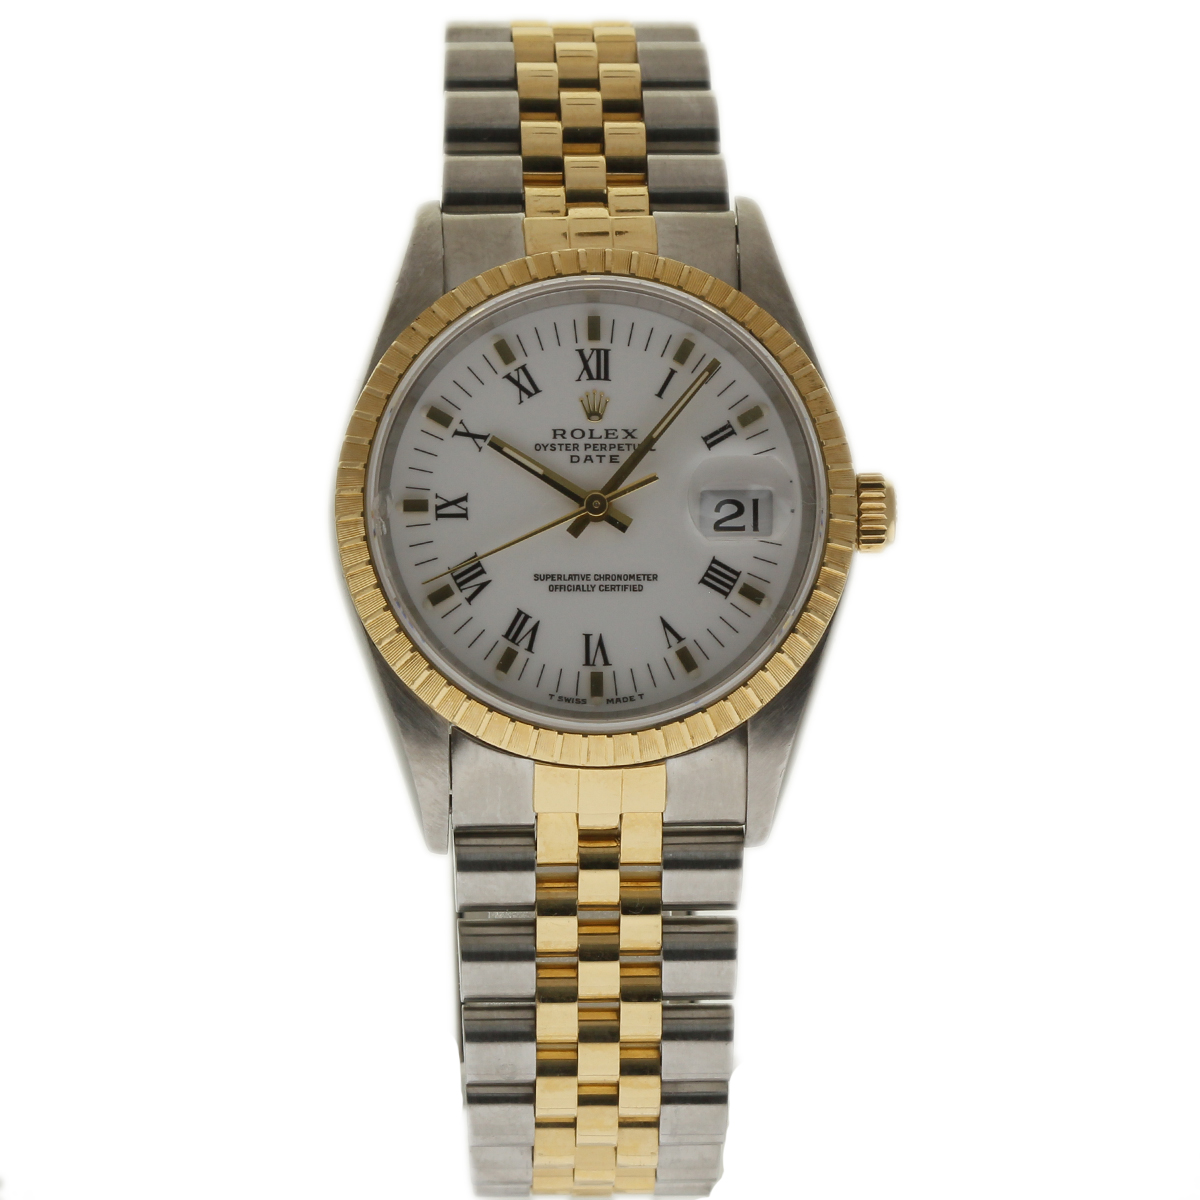 2-Tone Datejust 34mm on Jubilee Bracelet with White Roman Dial